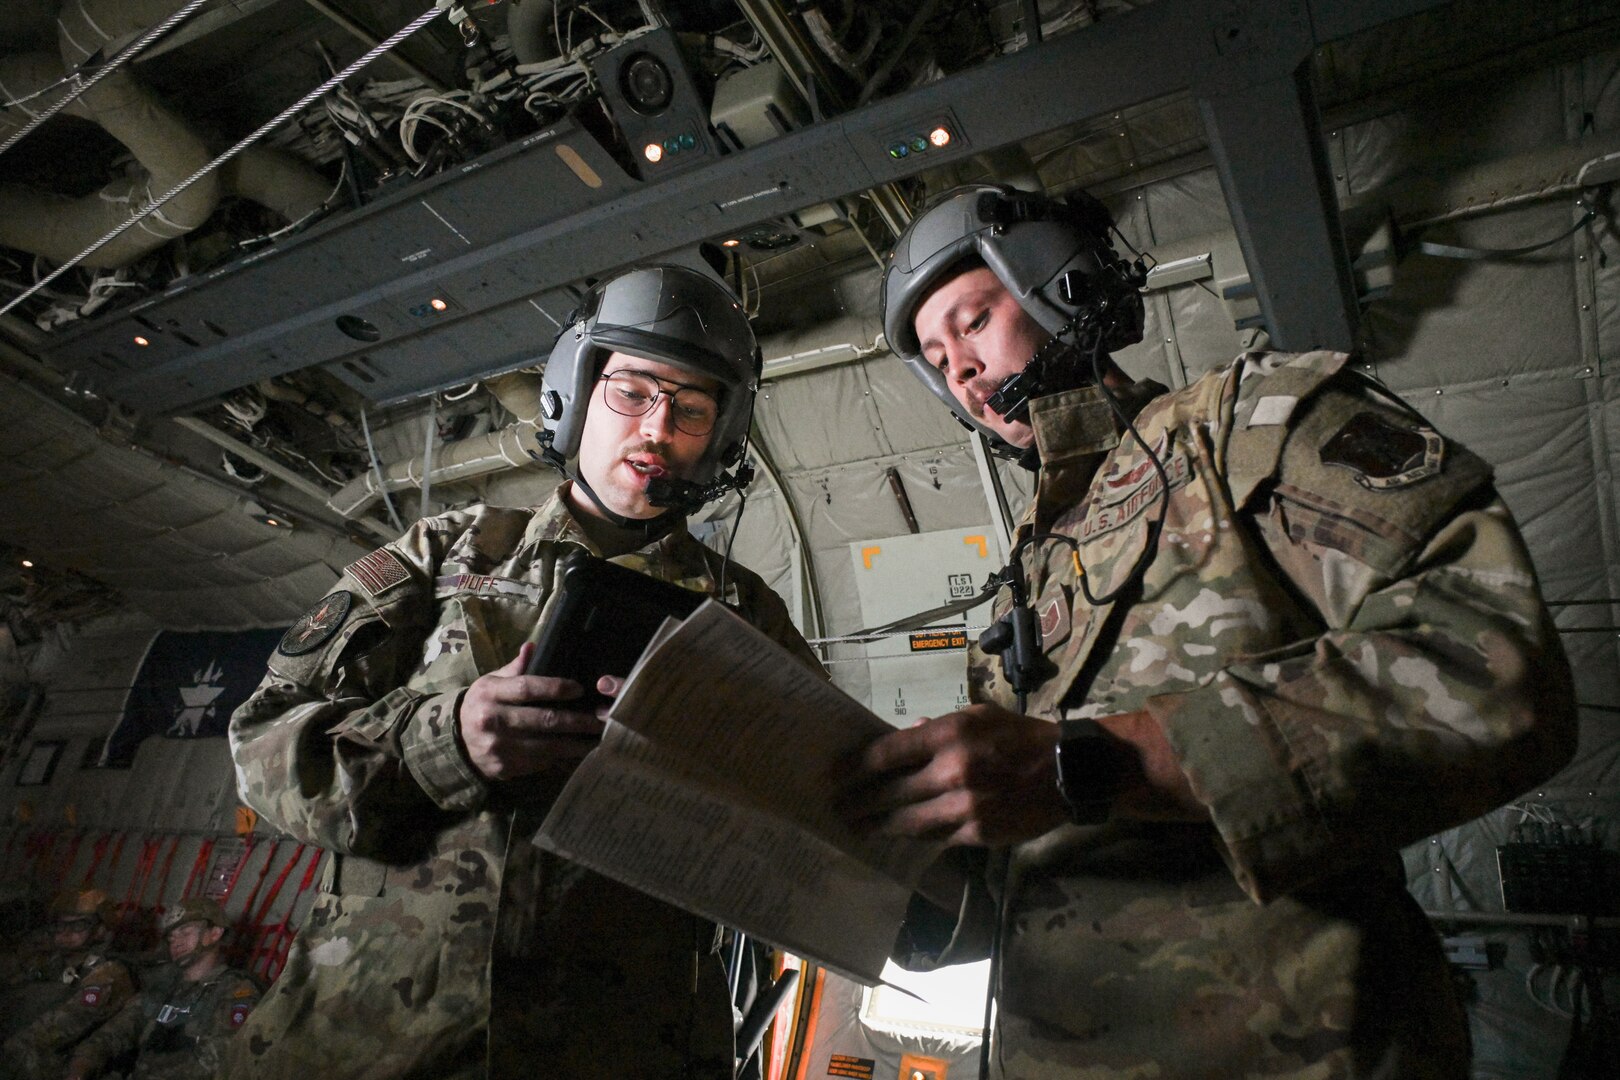 Tech. Sgt. Ryan Fenimore and Senior Airman Alex Huff, load masters, 181st Operations Squadron, Texas Air National Guard,  prepare the aircraft before takeoff during the Falcon Leap Exercise in Eindhoven, Netherlands, Sept. 13, 2022. Falcon Leap is part of the remembrance ceremonies for the anniversary of the World War II Operation Market Garden and is NATO’s largest technical airborne exercise.